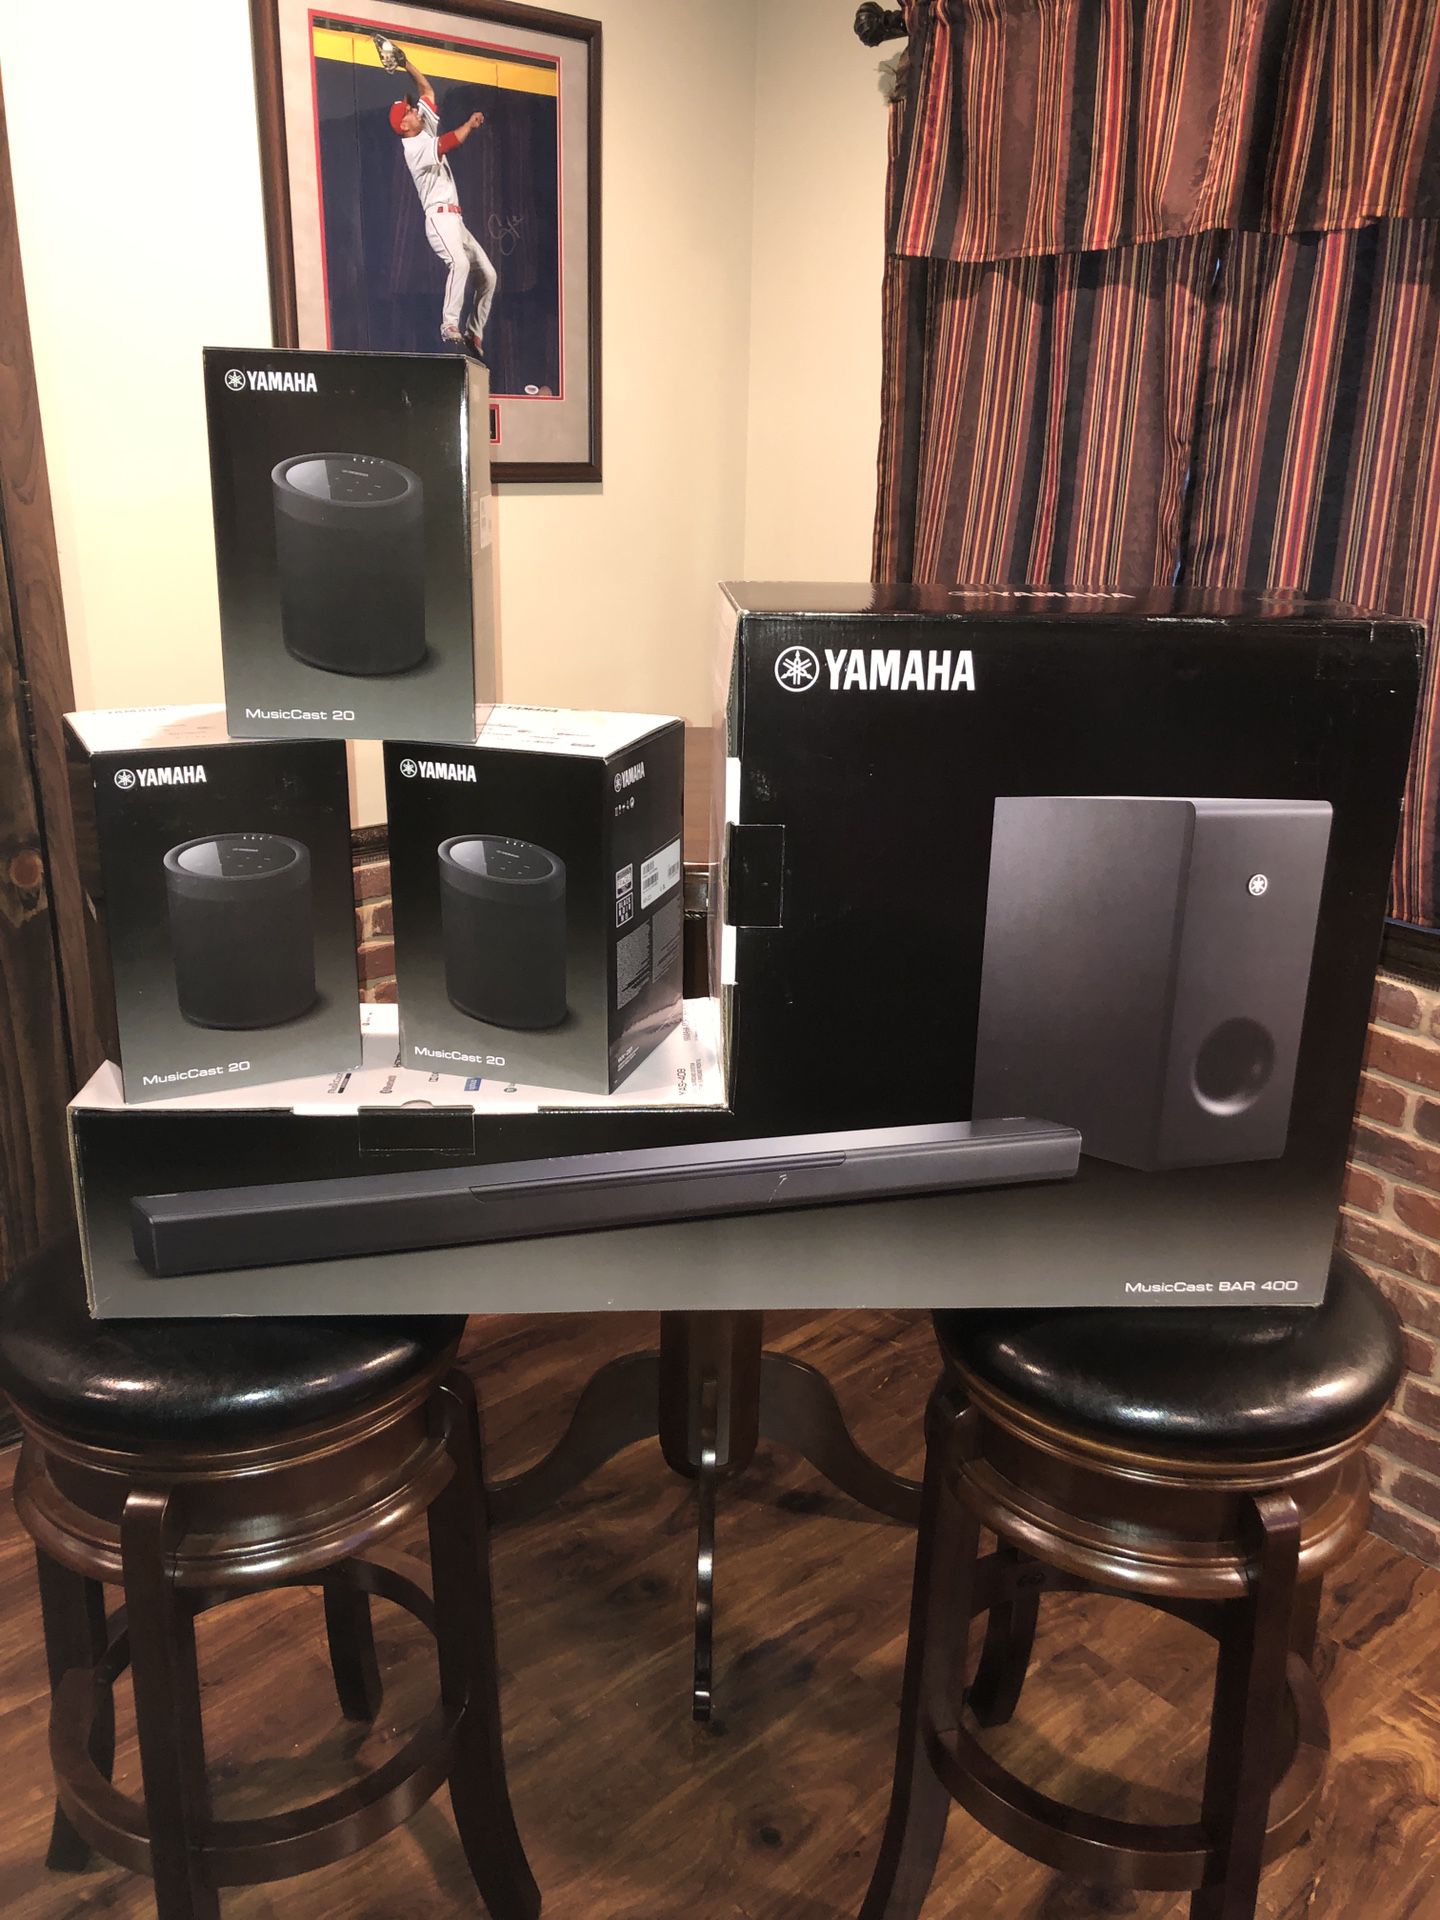 New, complete Yamaha Surround System with MusicCast 400 Soundbar, Subwoofer and (3) MusicCast20 Wireless Speakers